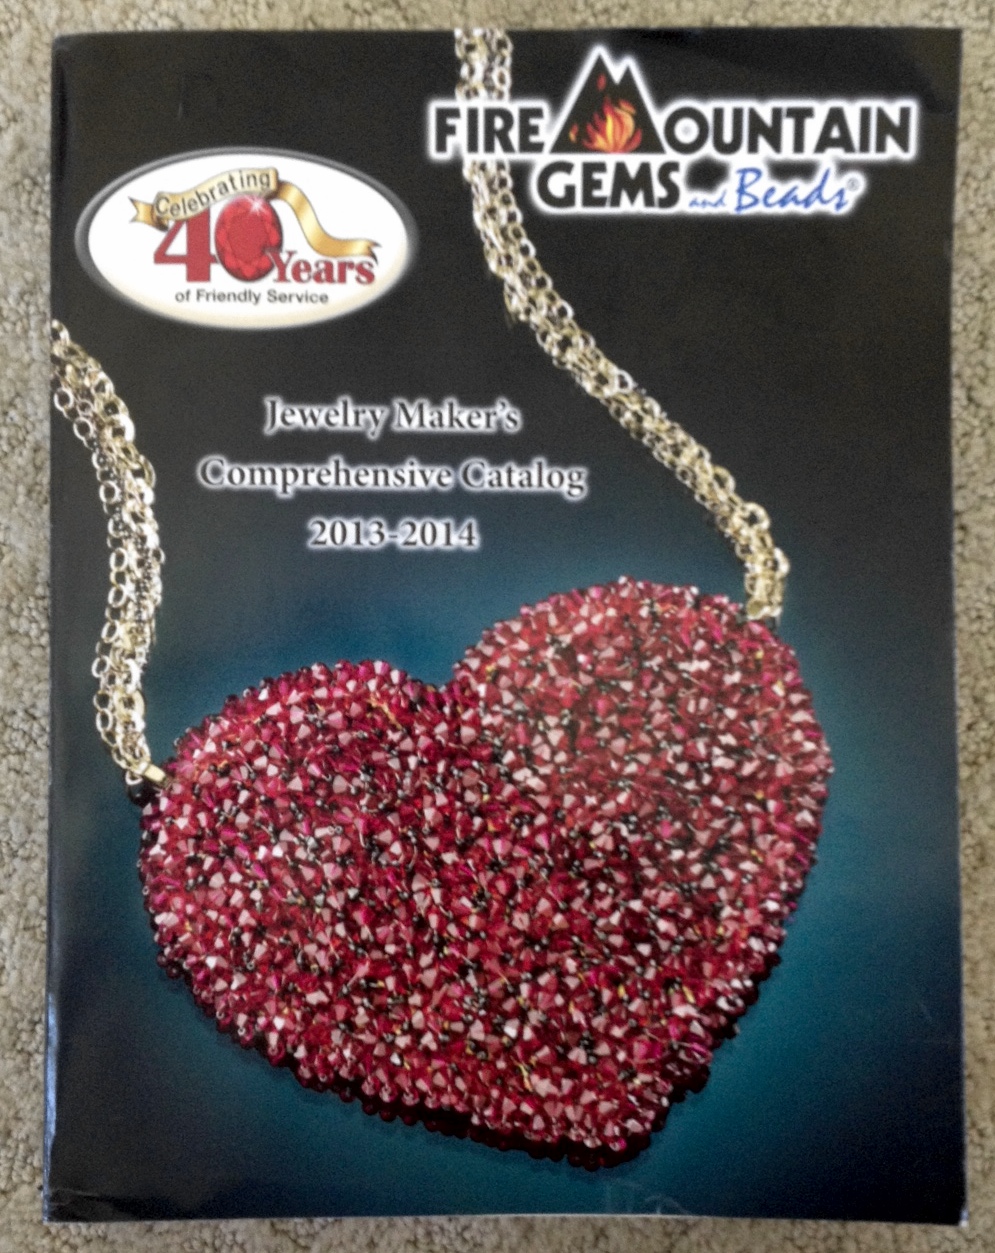 Jewelry Making Article - Jewelry and Jewelry Component Care - Dos and  Don'ts - Fire Mountain Gems and Beads